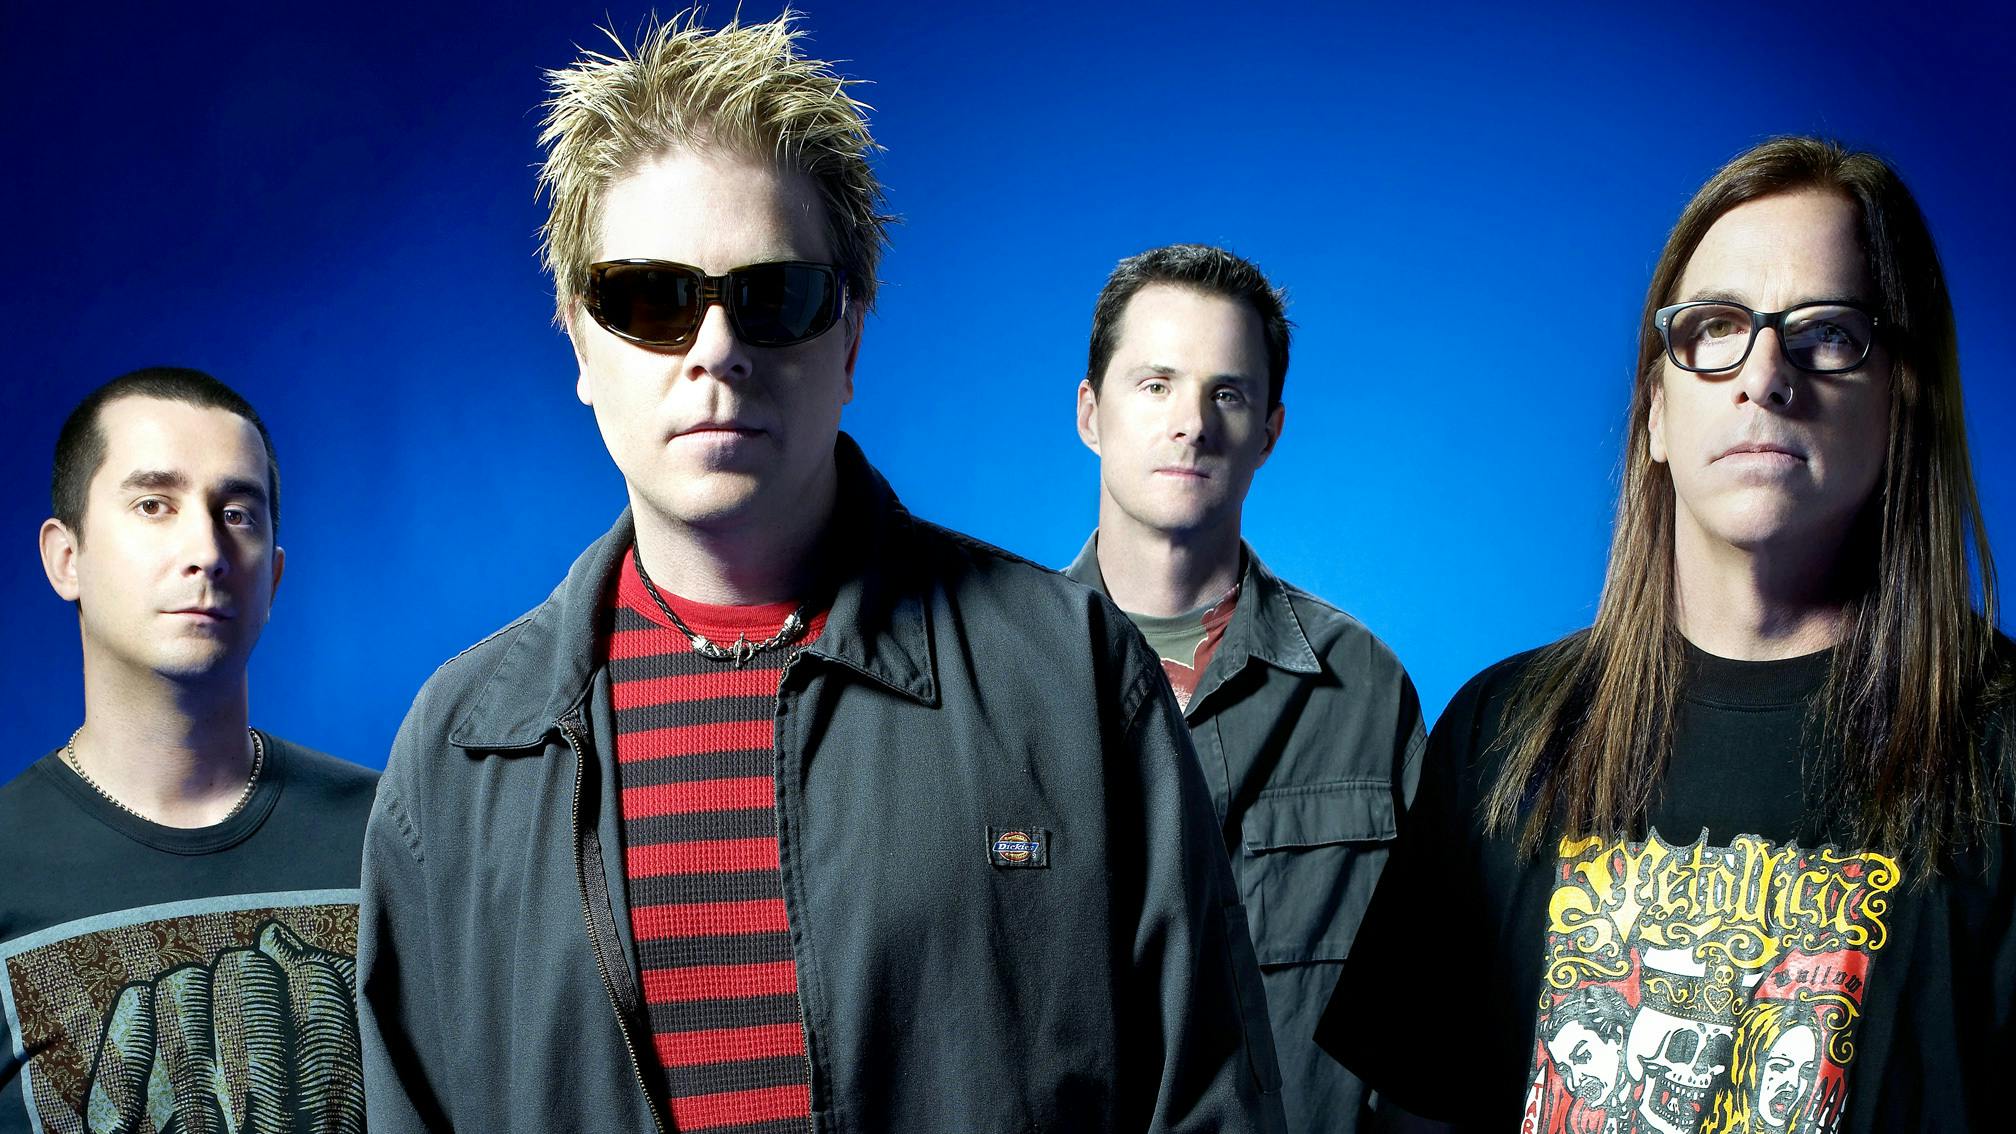 The 20 greatest The Offspring songs – ranked